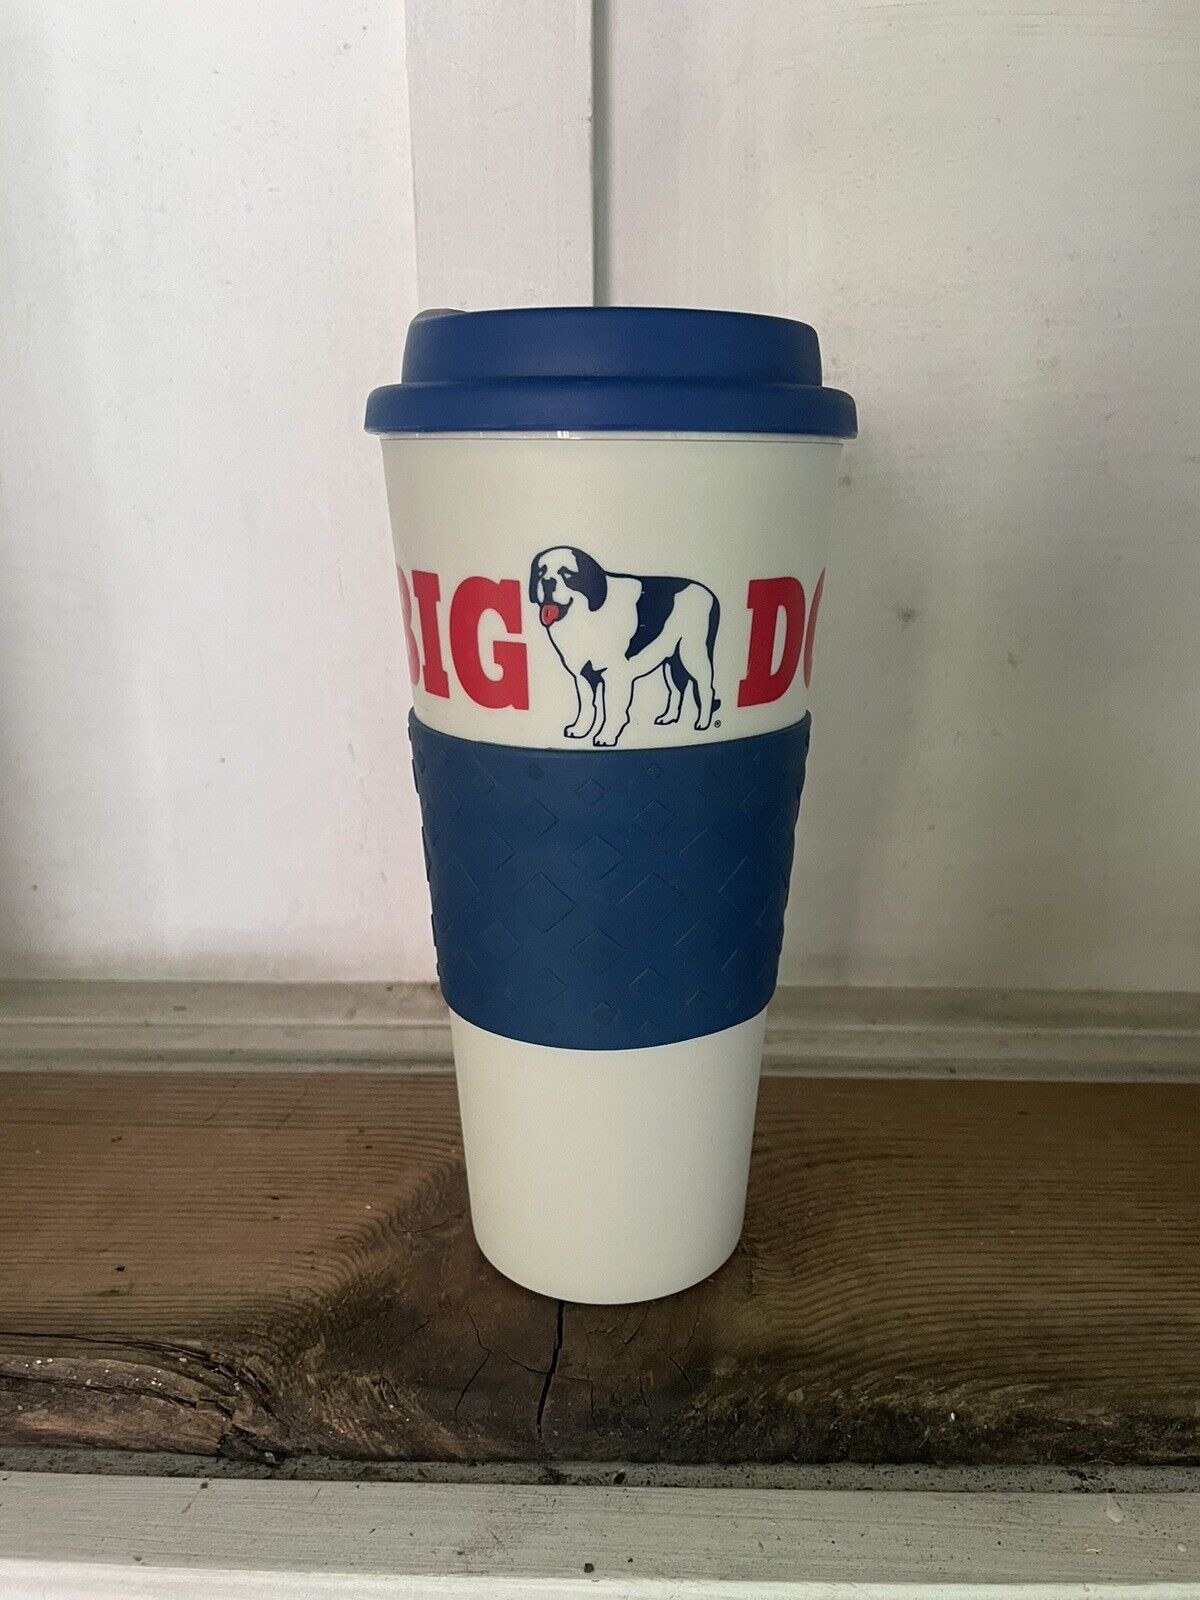 BIG DOGS LARGE Plastic Coffee Cup Travel Mug 9 Inches Tall Insulated NICE